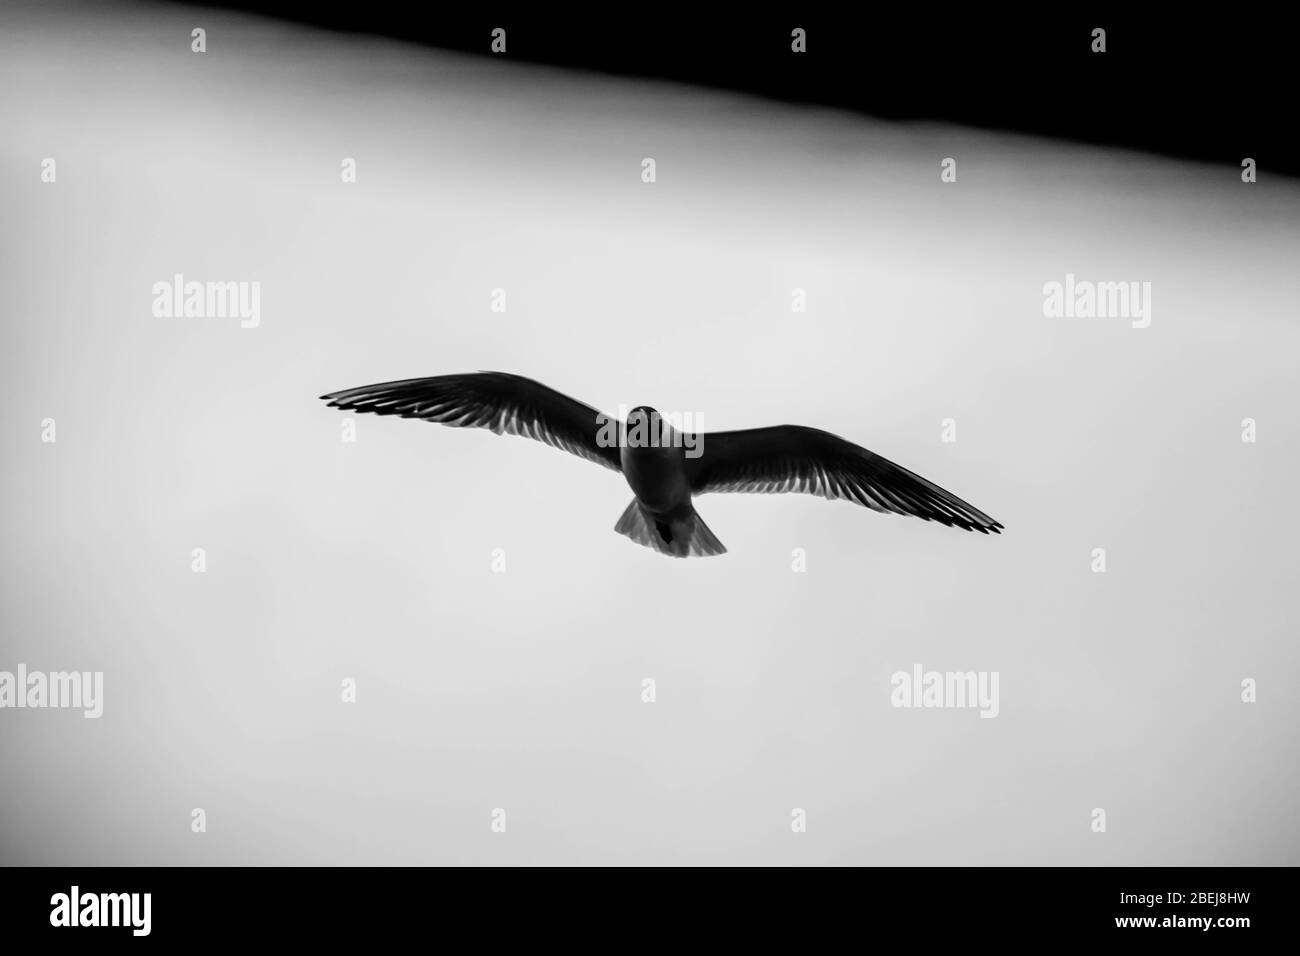 Black silhouette of seagull in flight with spread wings on the white sky background Stock Photo